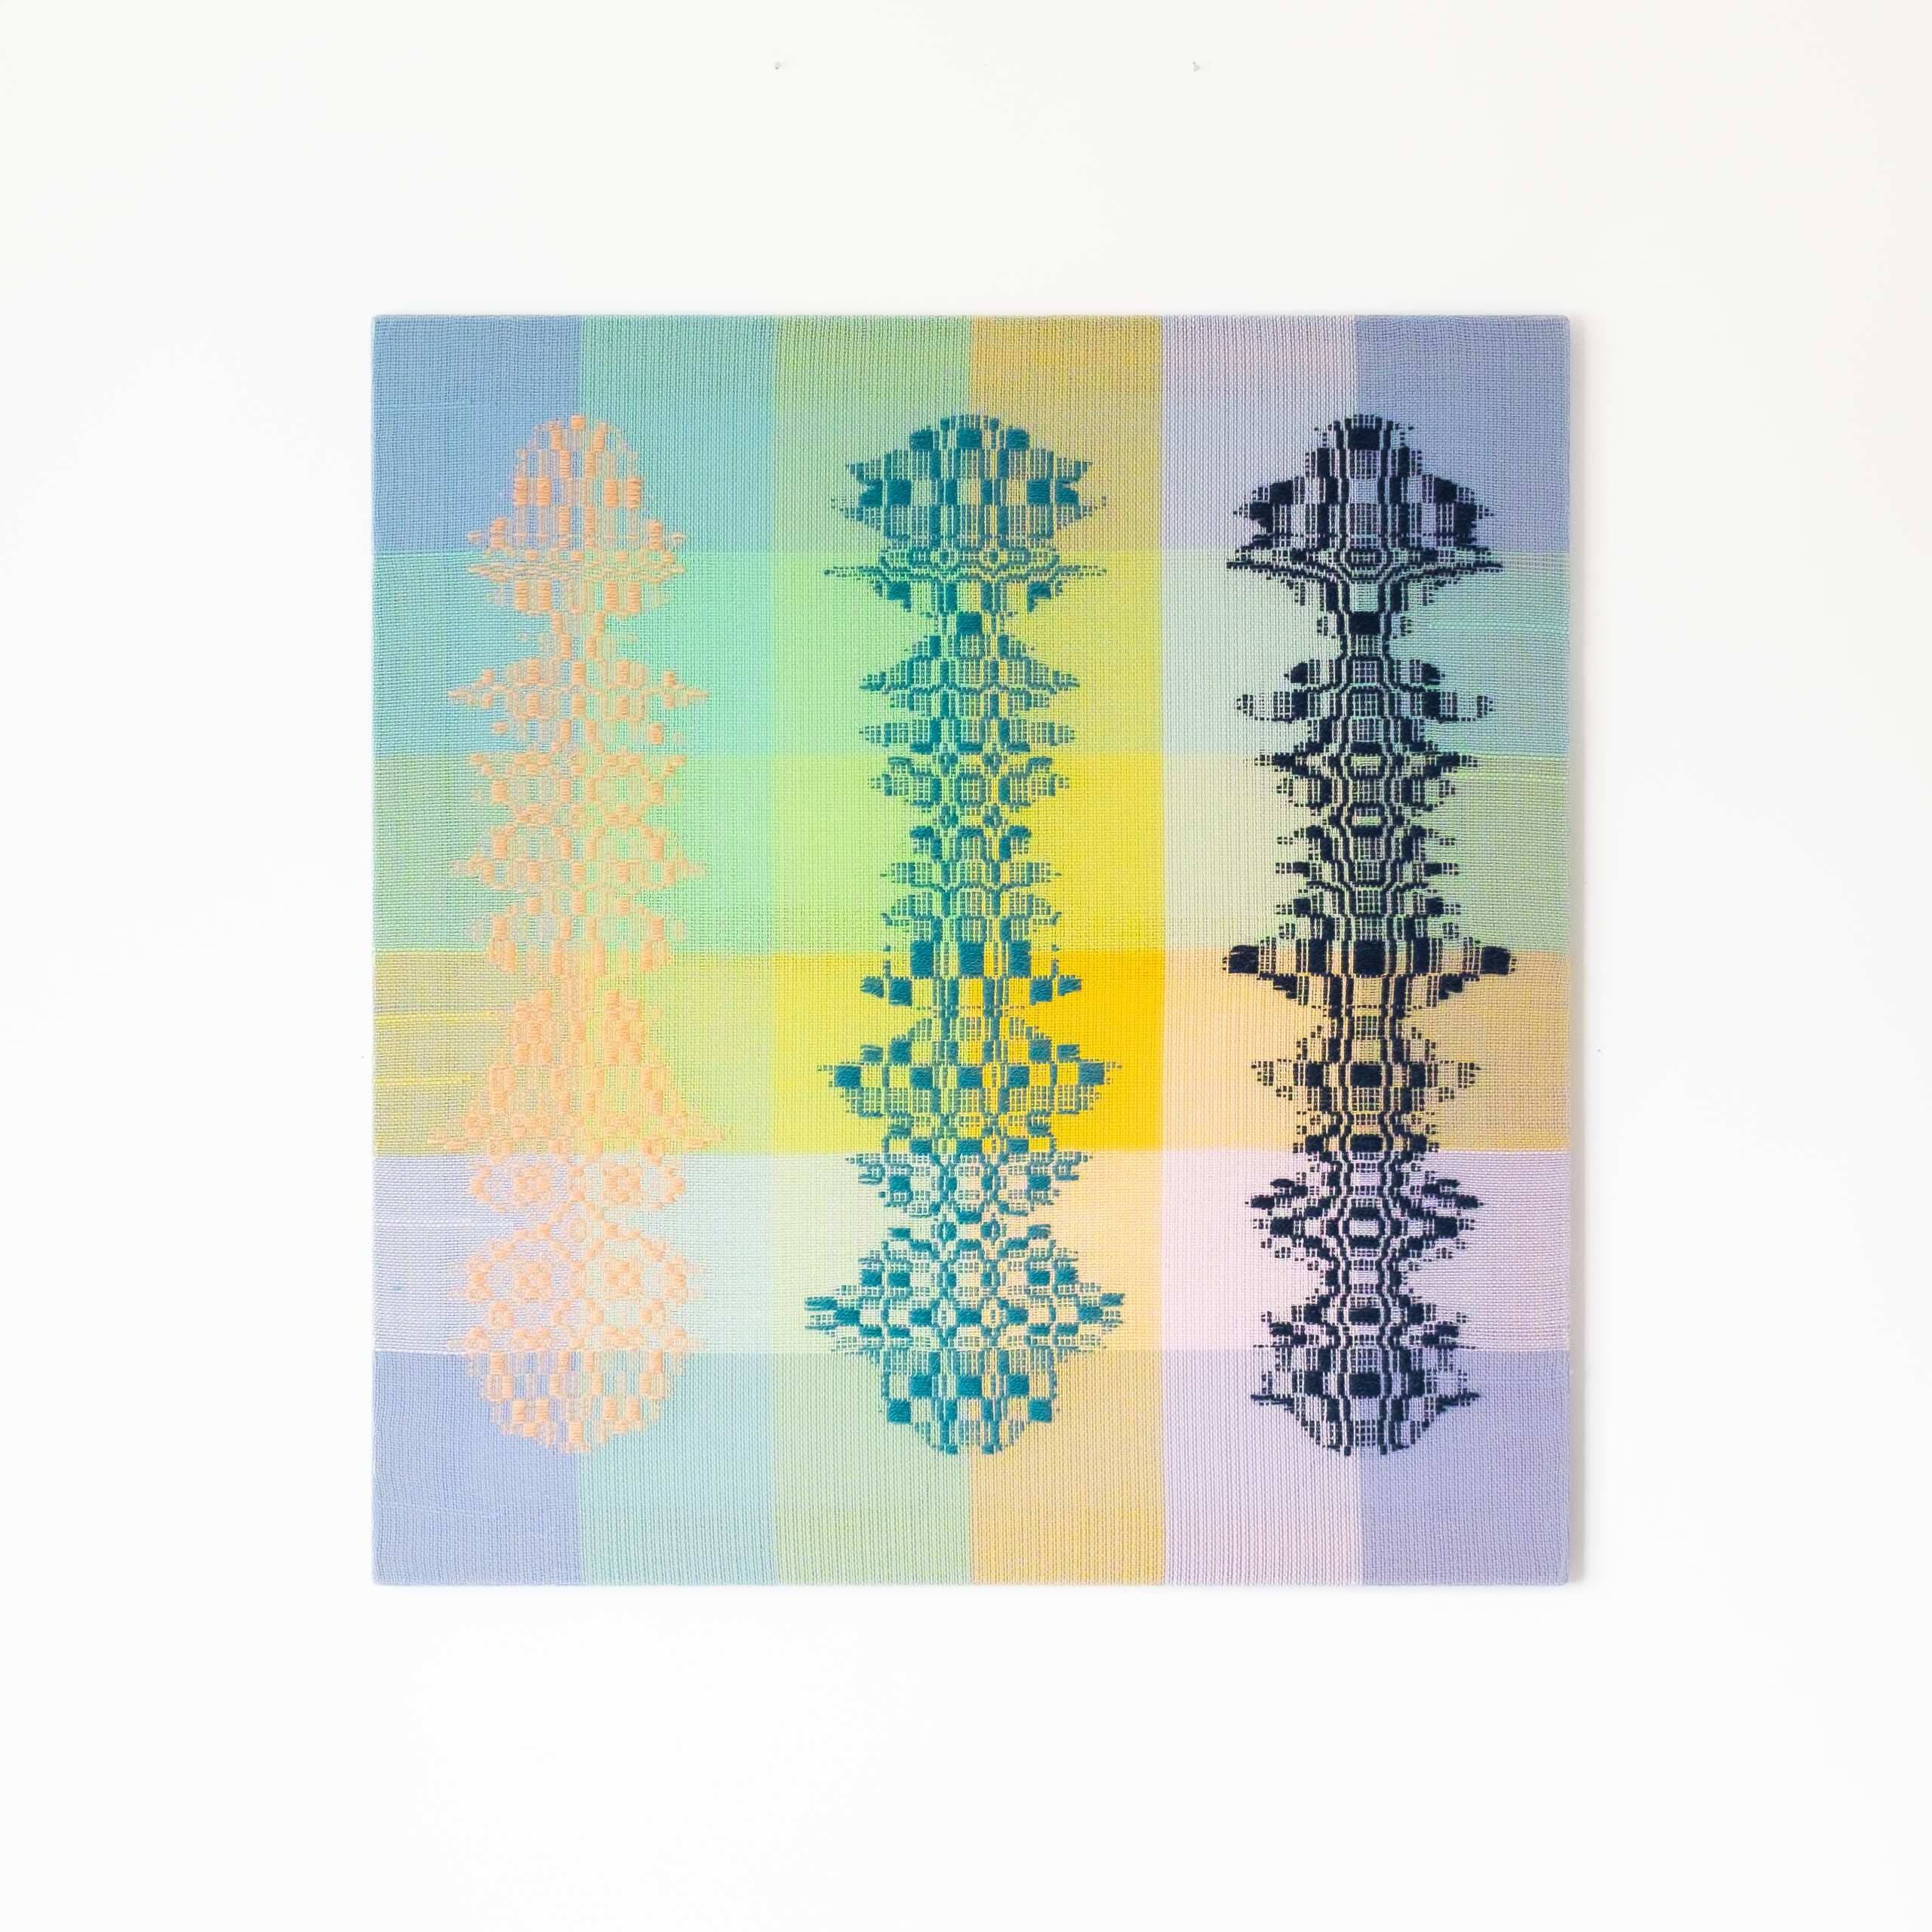 Three beings [peach-teal-navy on pastel ground], Hand-woven cotton and wool yarn, 2022